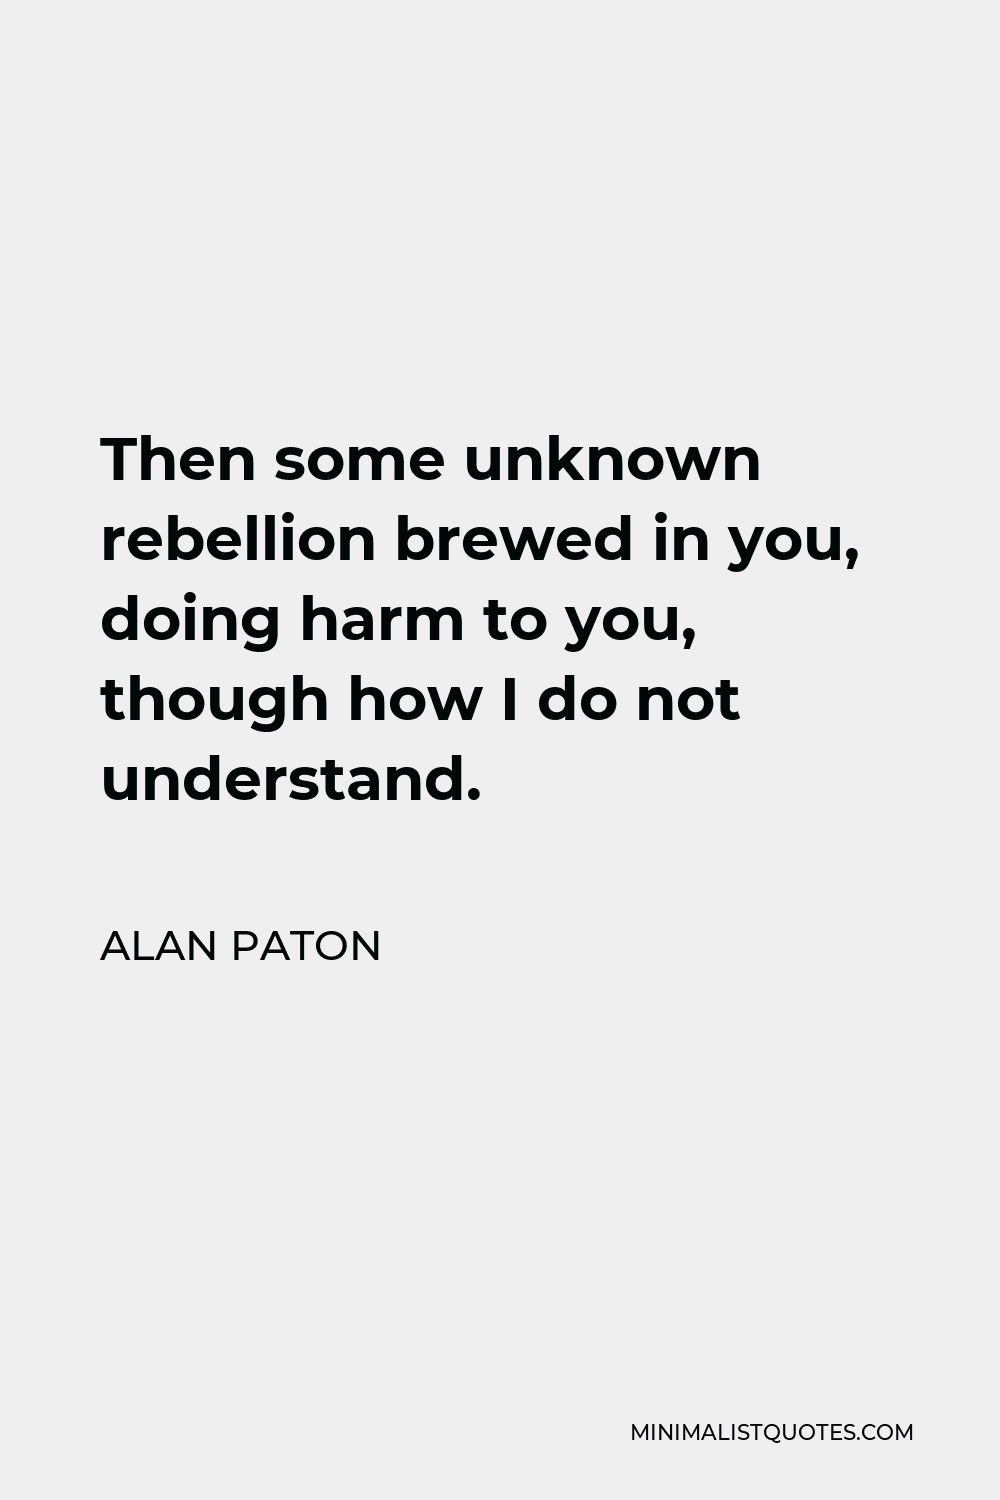 Alan Paton Quote - Then some unknown rebellion brewed in you, doing harm to you, though how I do not understand.